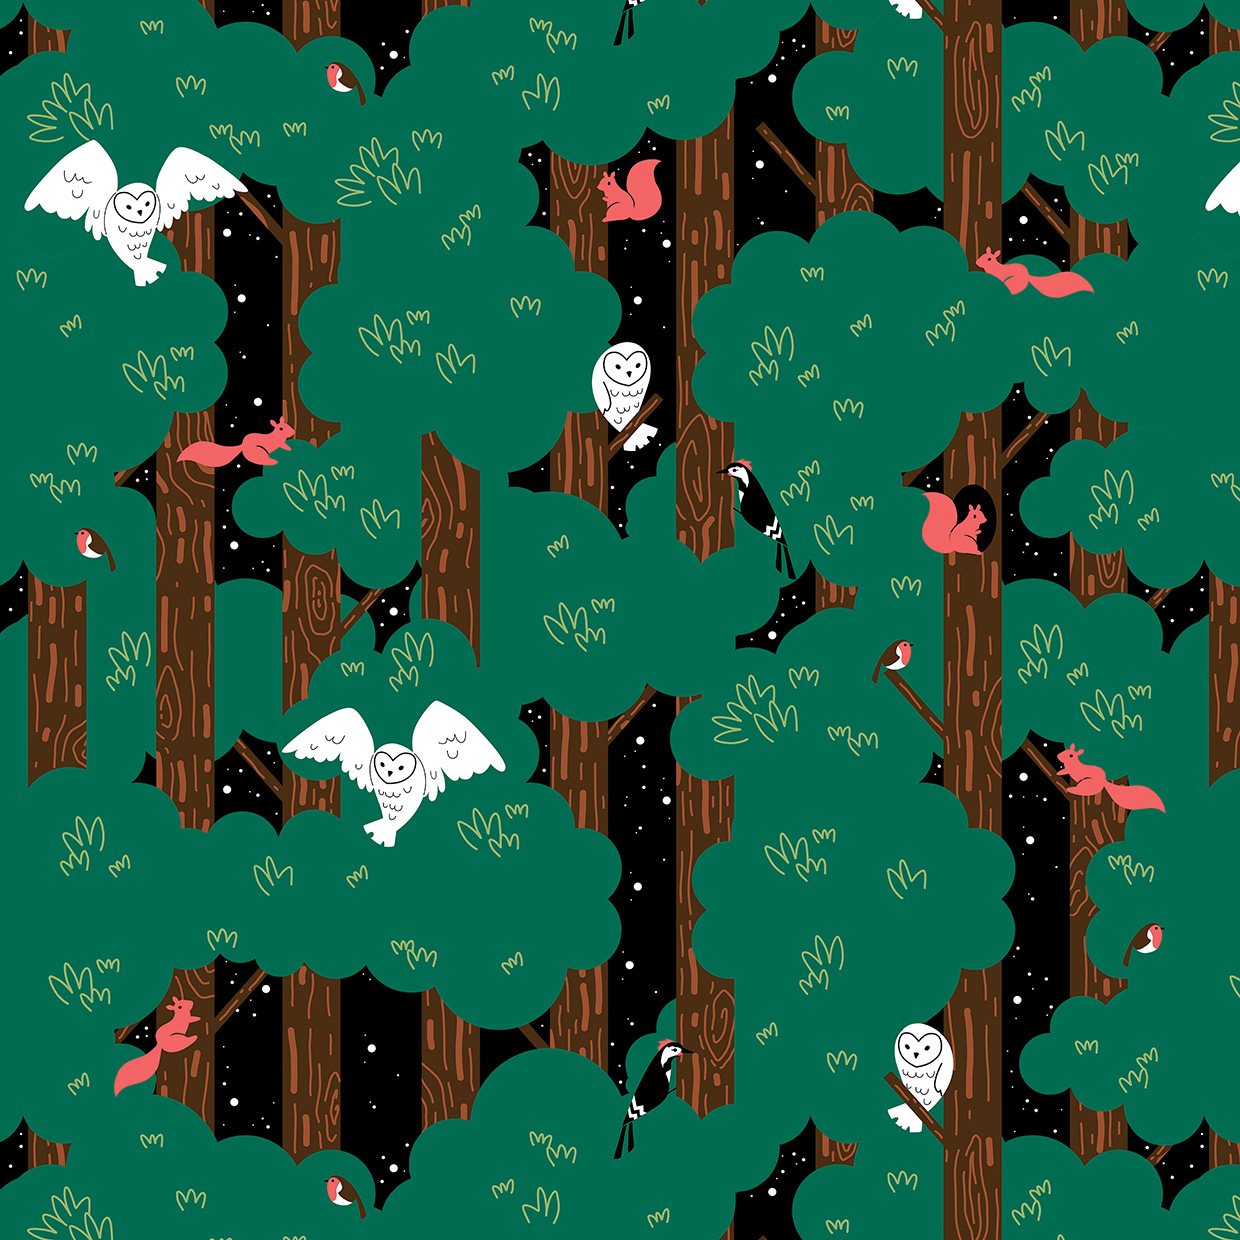 THE LLAMAS_night in the woods pattern_starry nights collection_laura galeazzo